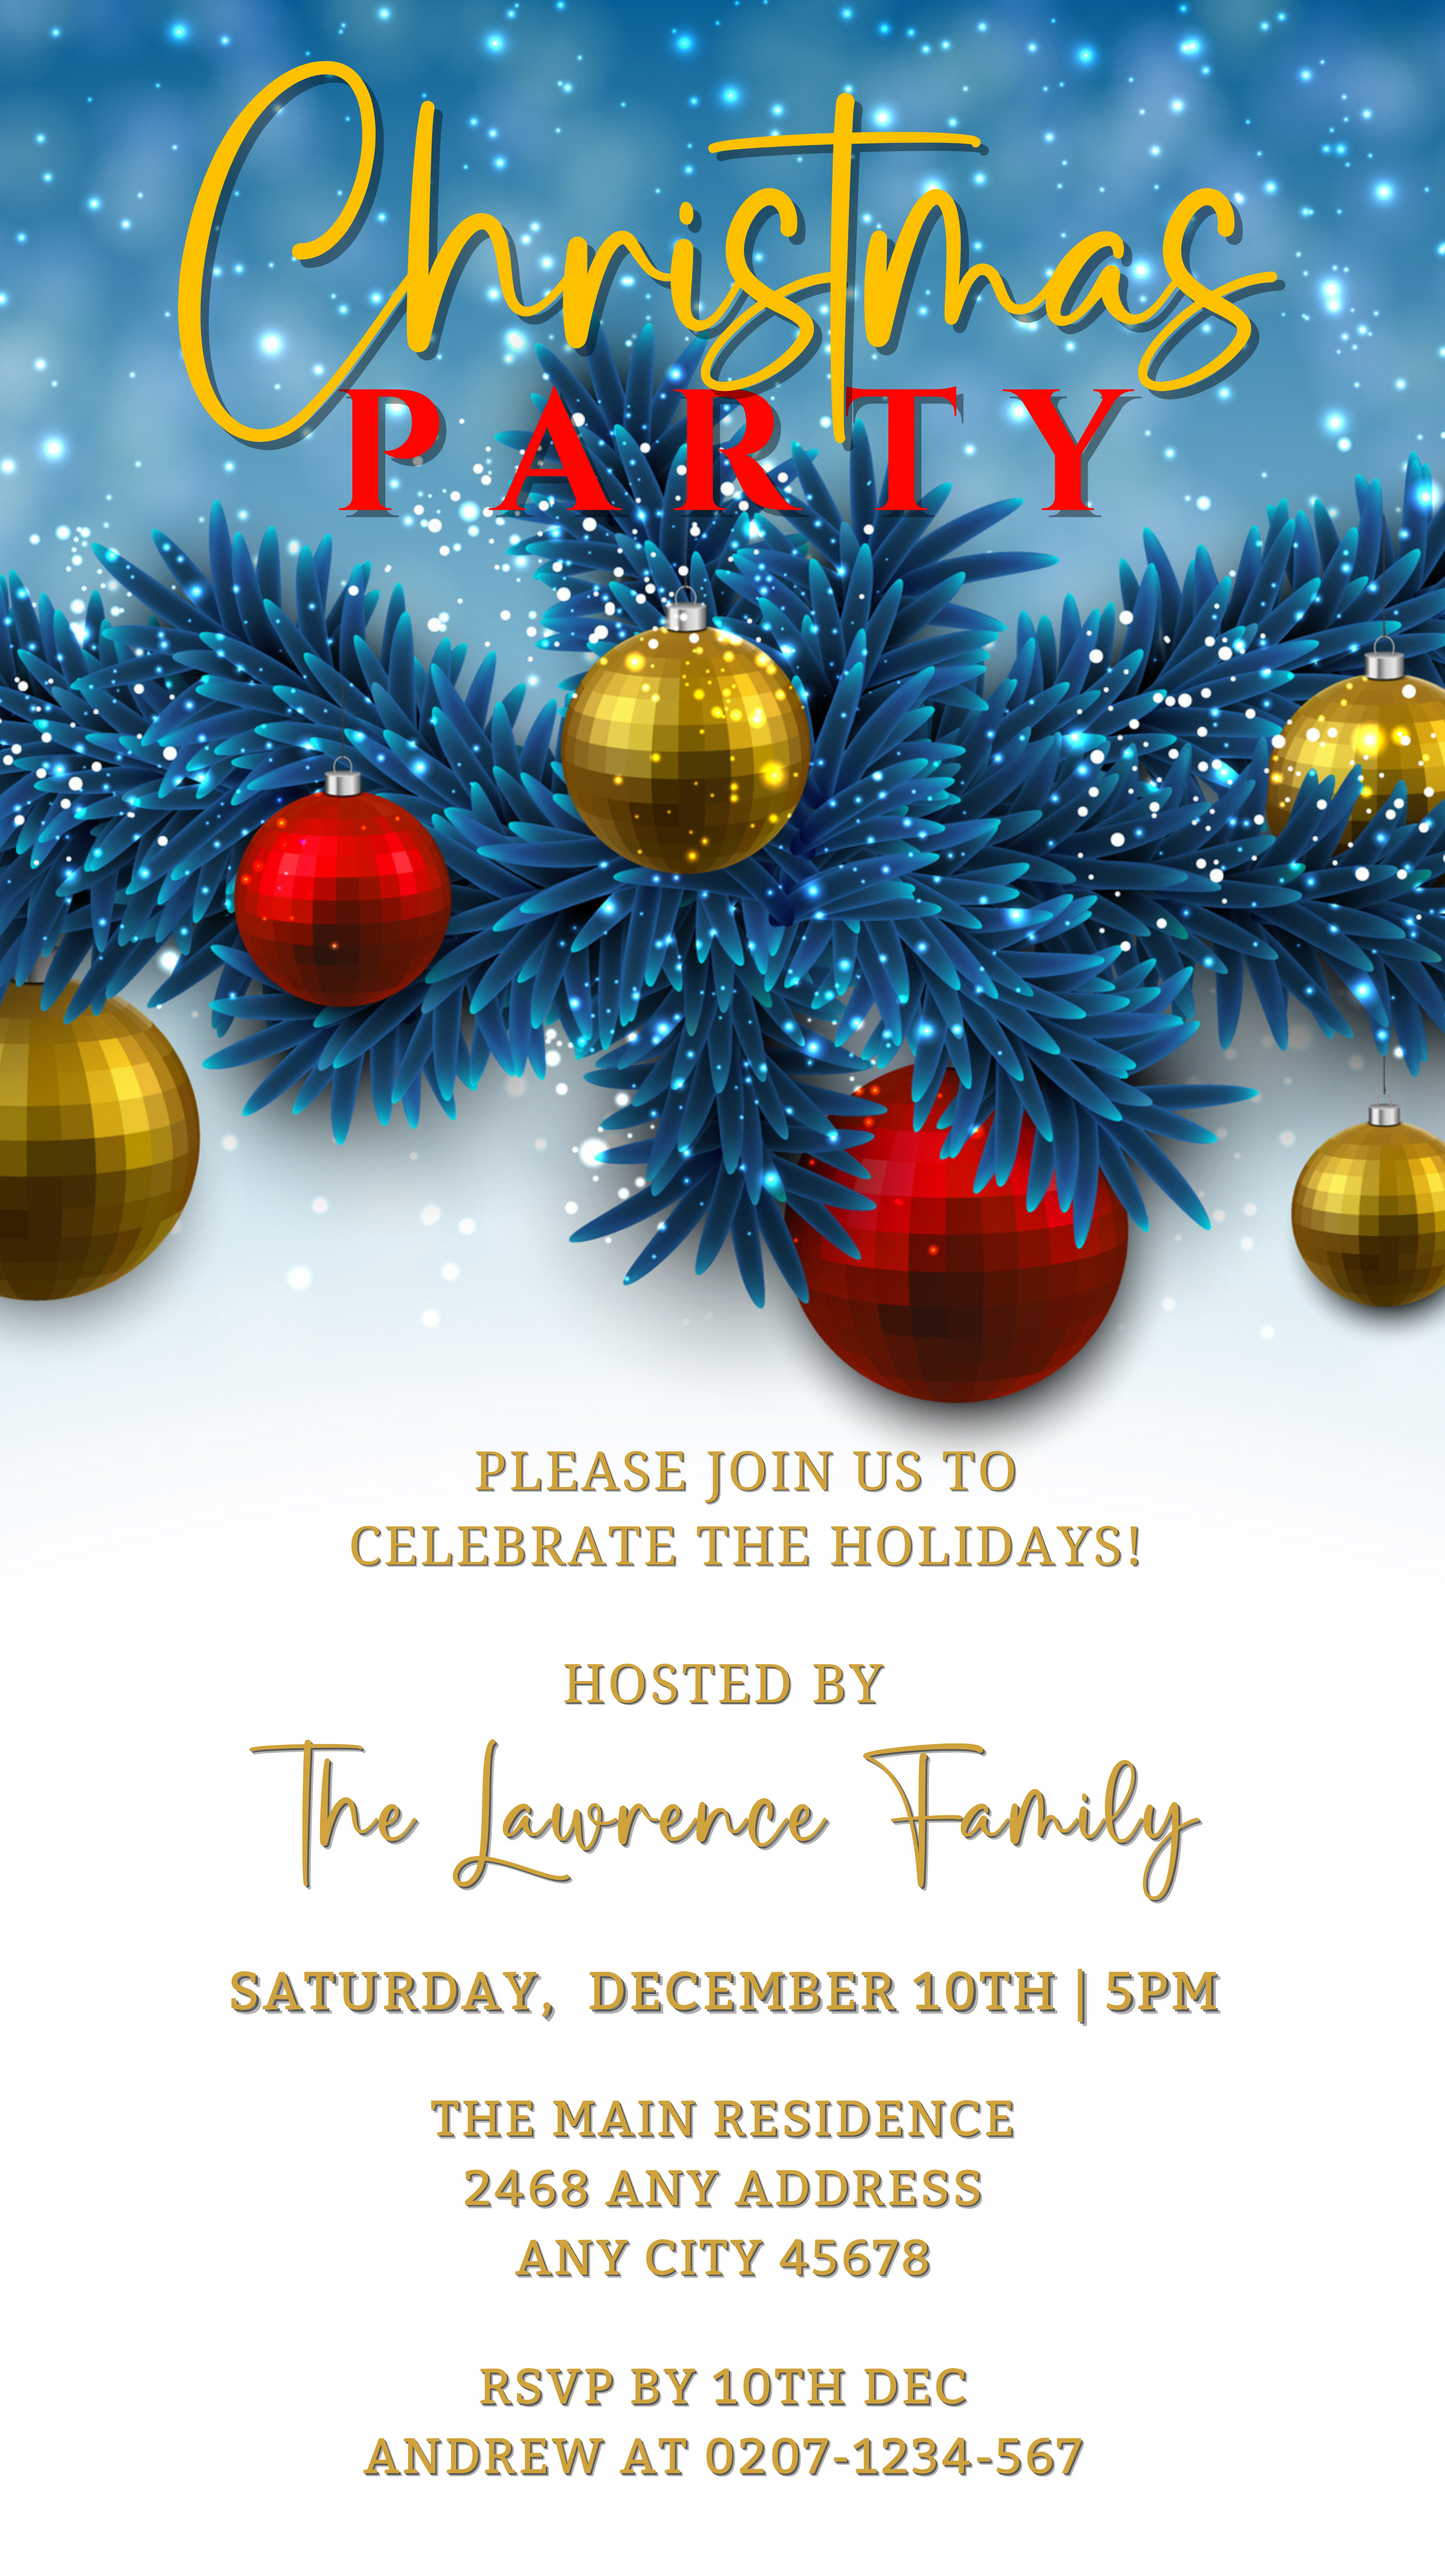 Blue Gold Red Ornaments Christmas Party Invitation template featuring festive ornaments on a pine tree branch, editable via Canva for personalized digital invites.